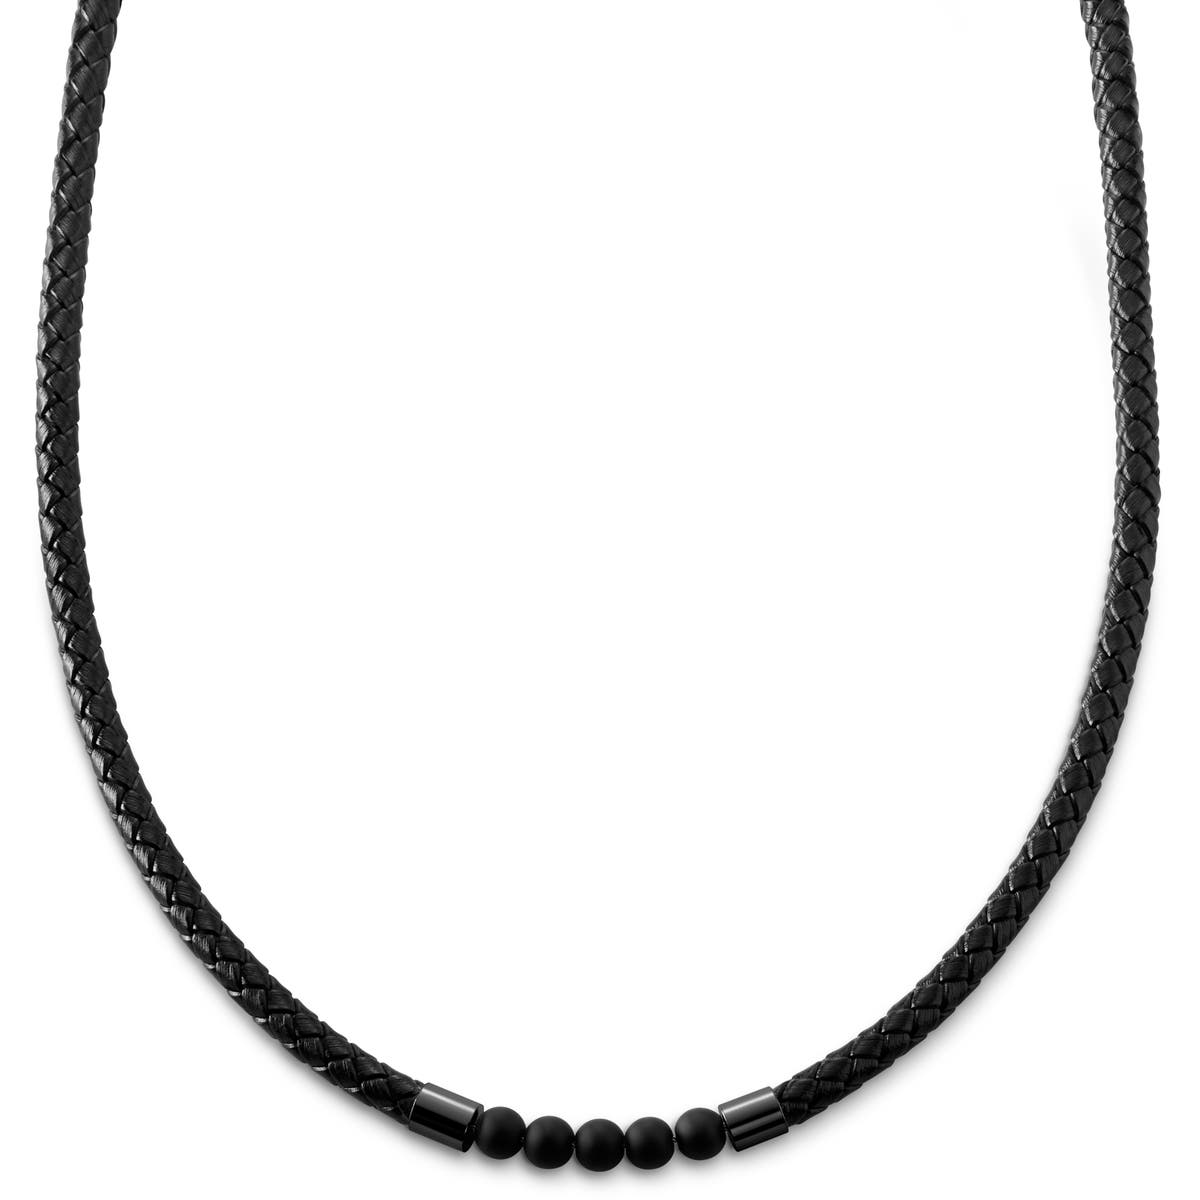 Men's leather necklaces | 29 Styles for men in stock